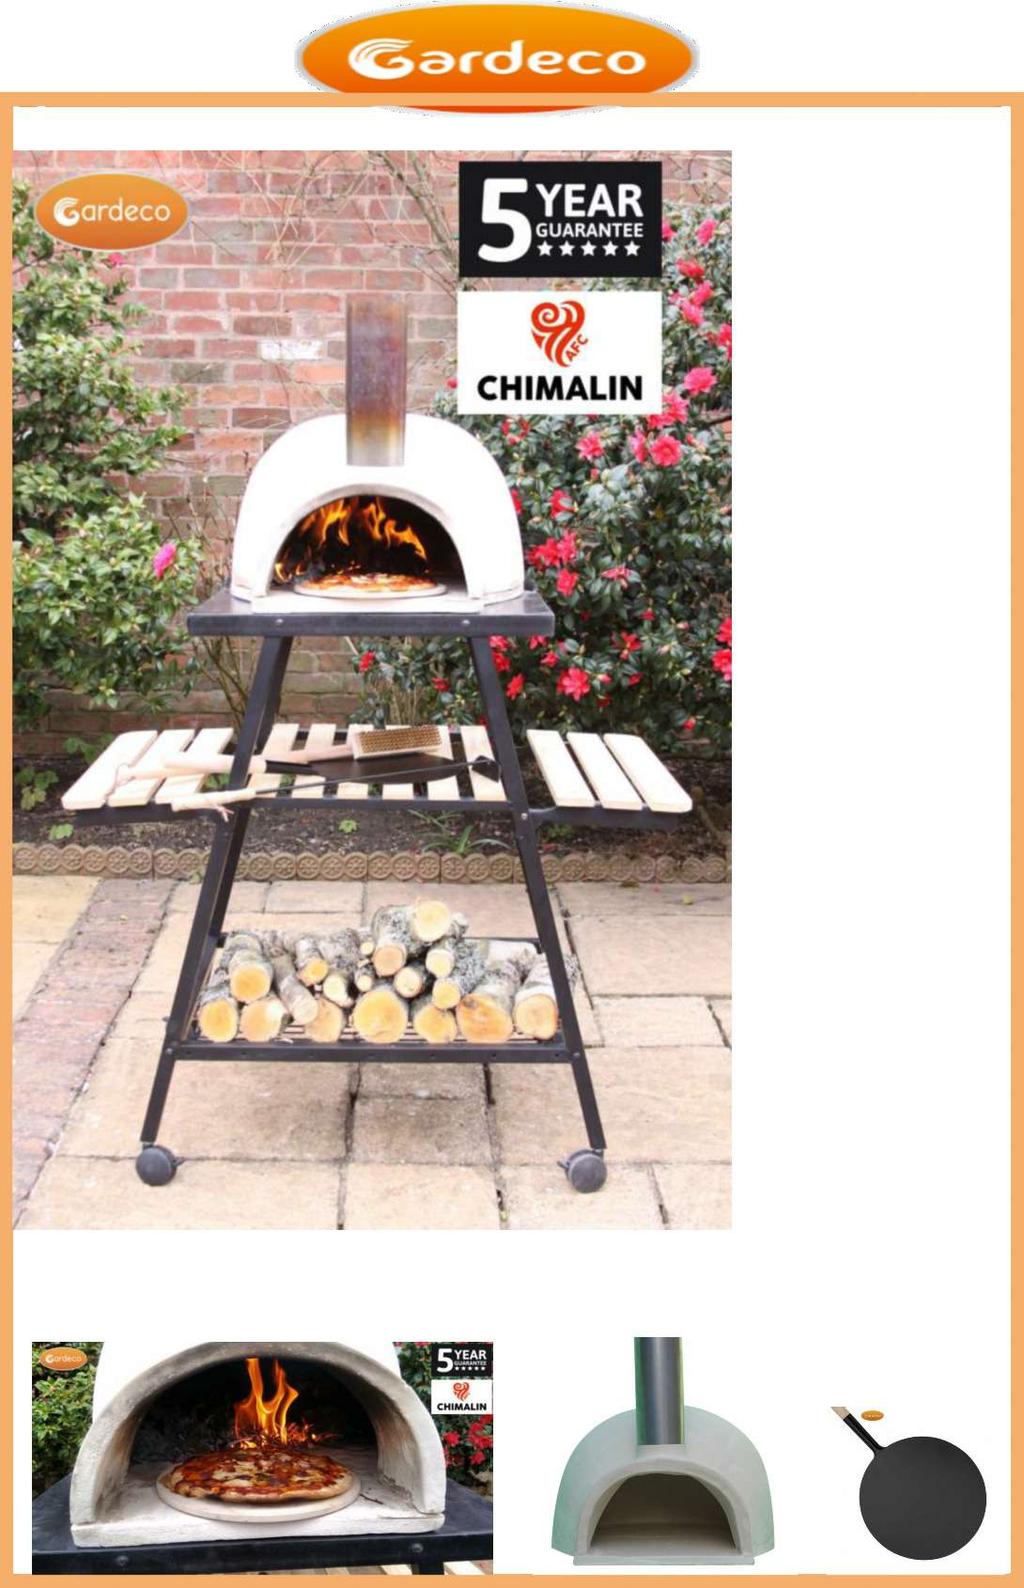 PIZZARO & STAND PIZZA OVEN Features: Traditional design pizza oven with dome and front funnel 599.99 Made of CHIMALIN AFC.